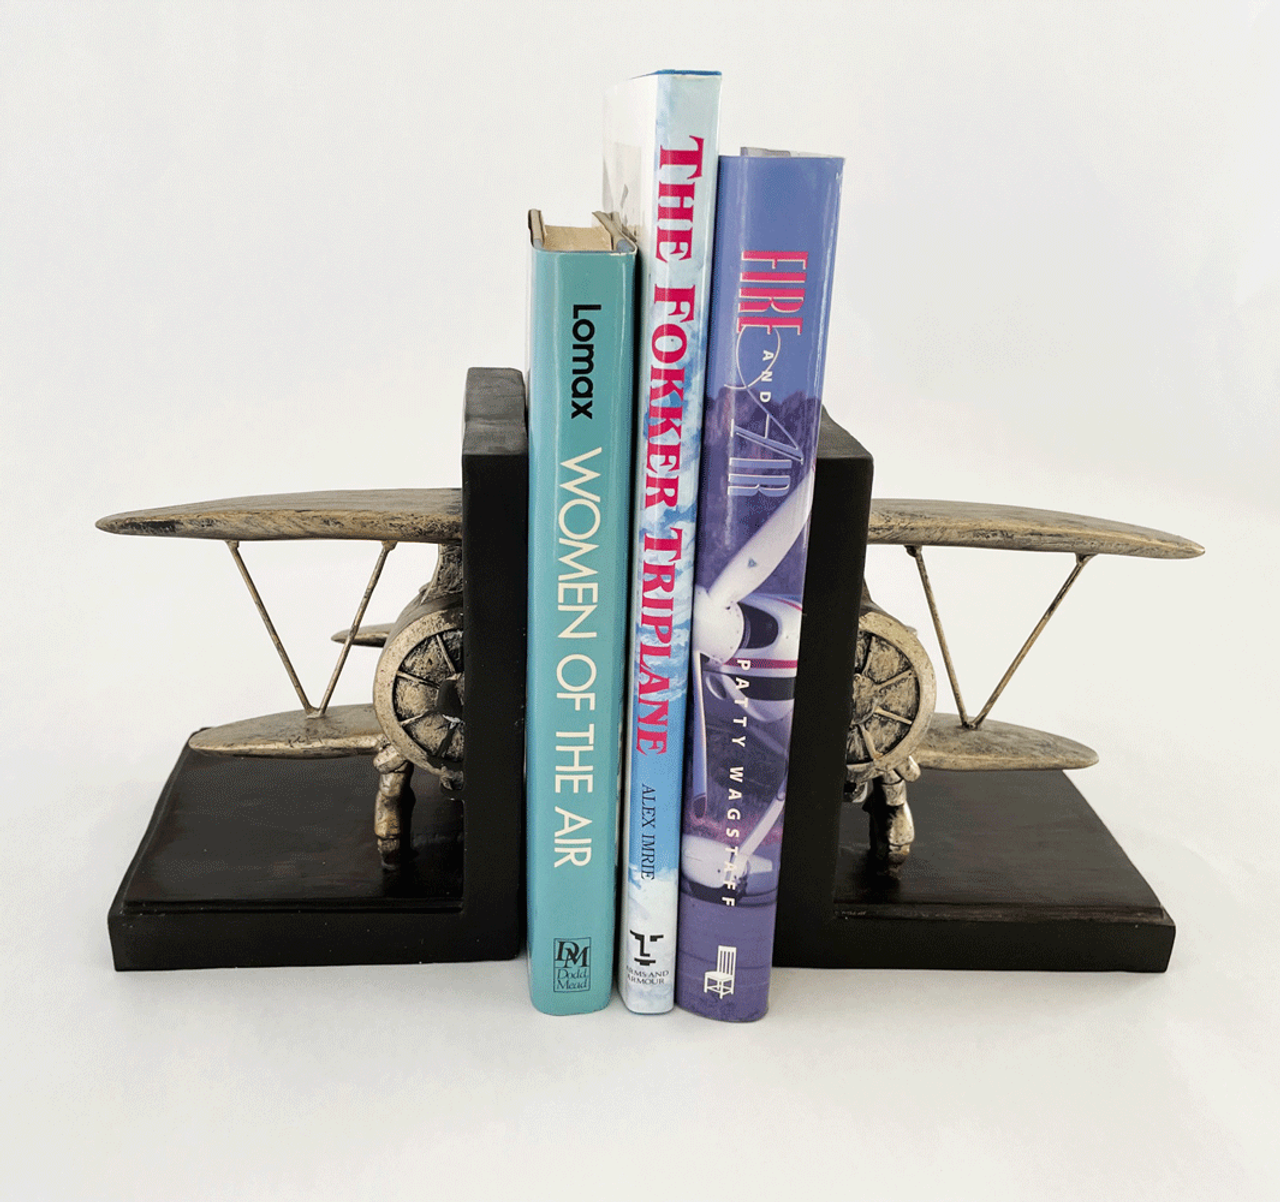 Biplane Bookends